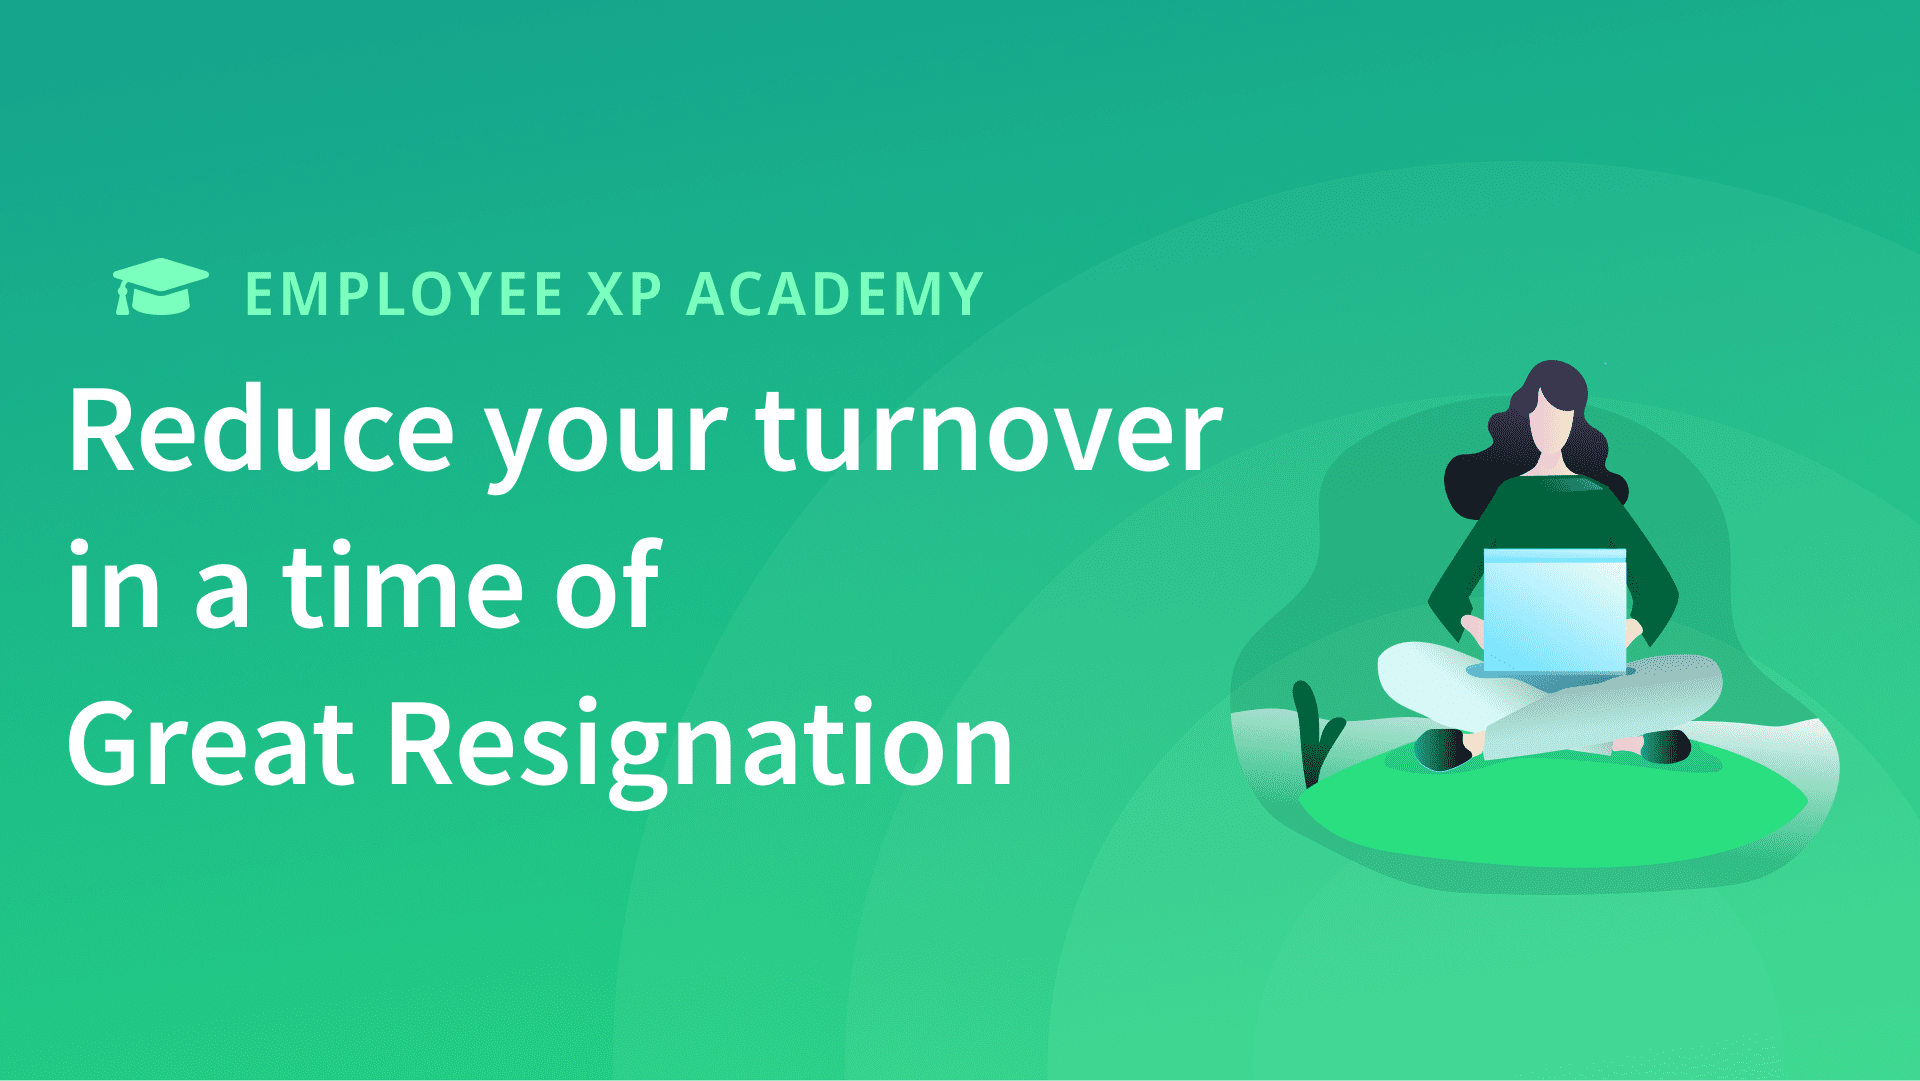 How to reduce your turnover in a time of “Great Resignation”?